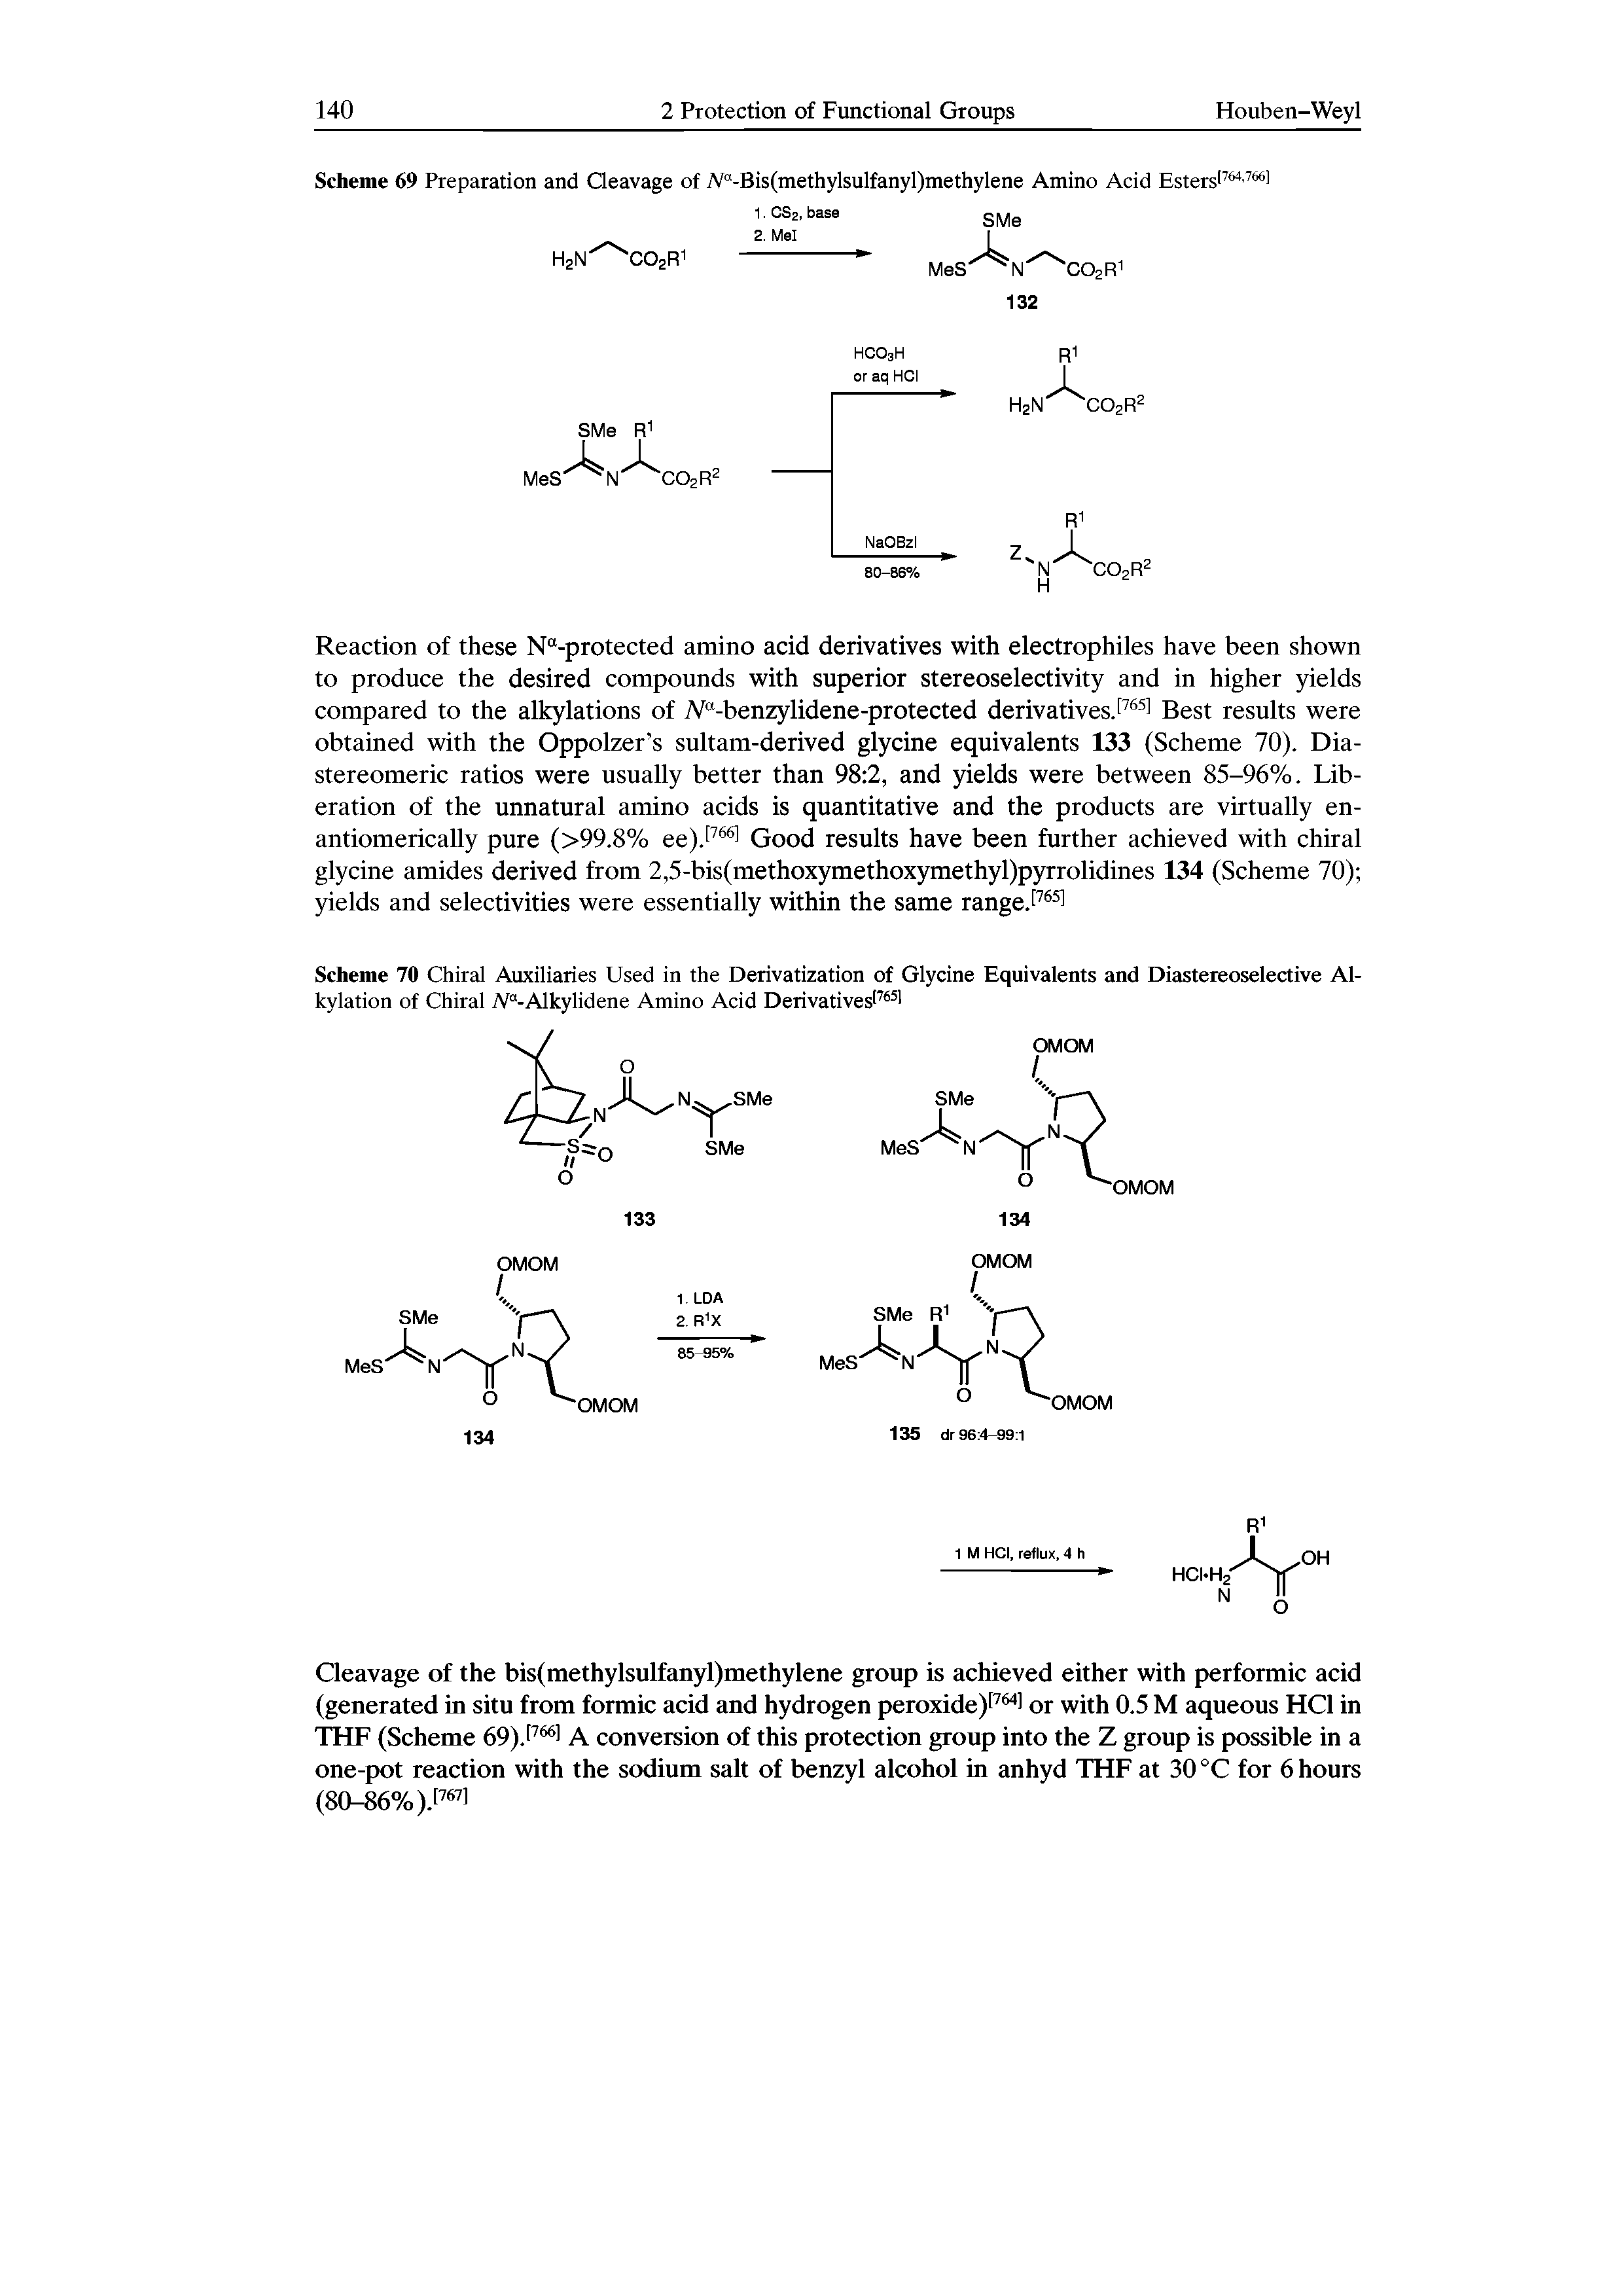 Scheme 70 Chiral Auxiliaries Used in the Derivatization of Glycine Equivalents and Diastereoselective Alkylation of Chiral A -Alkylidene Amino Acid Derivatives ...